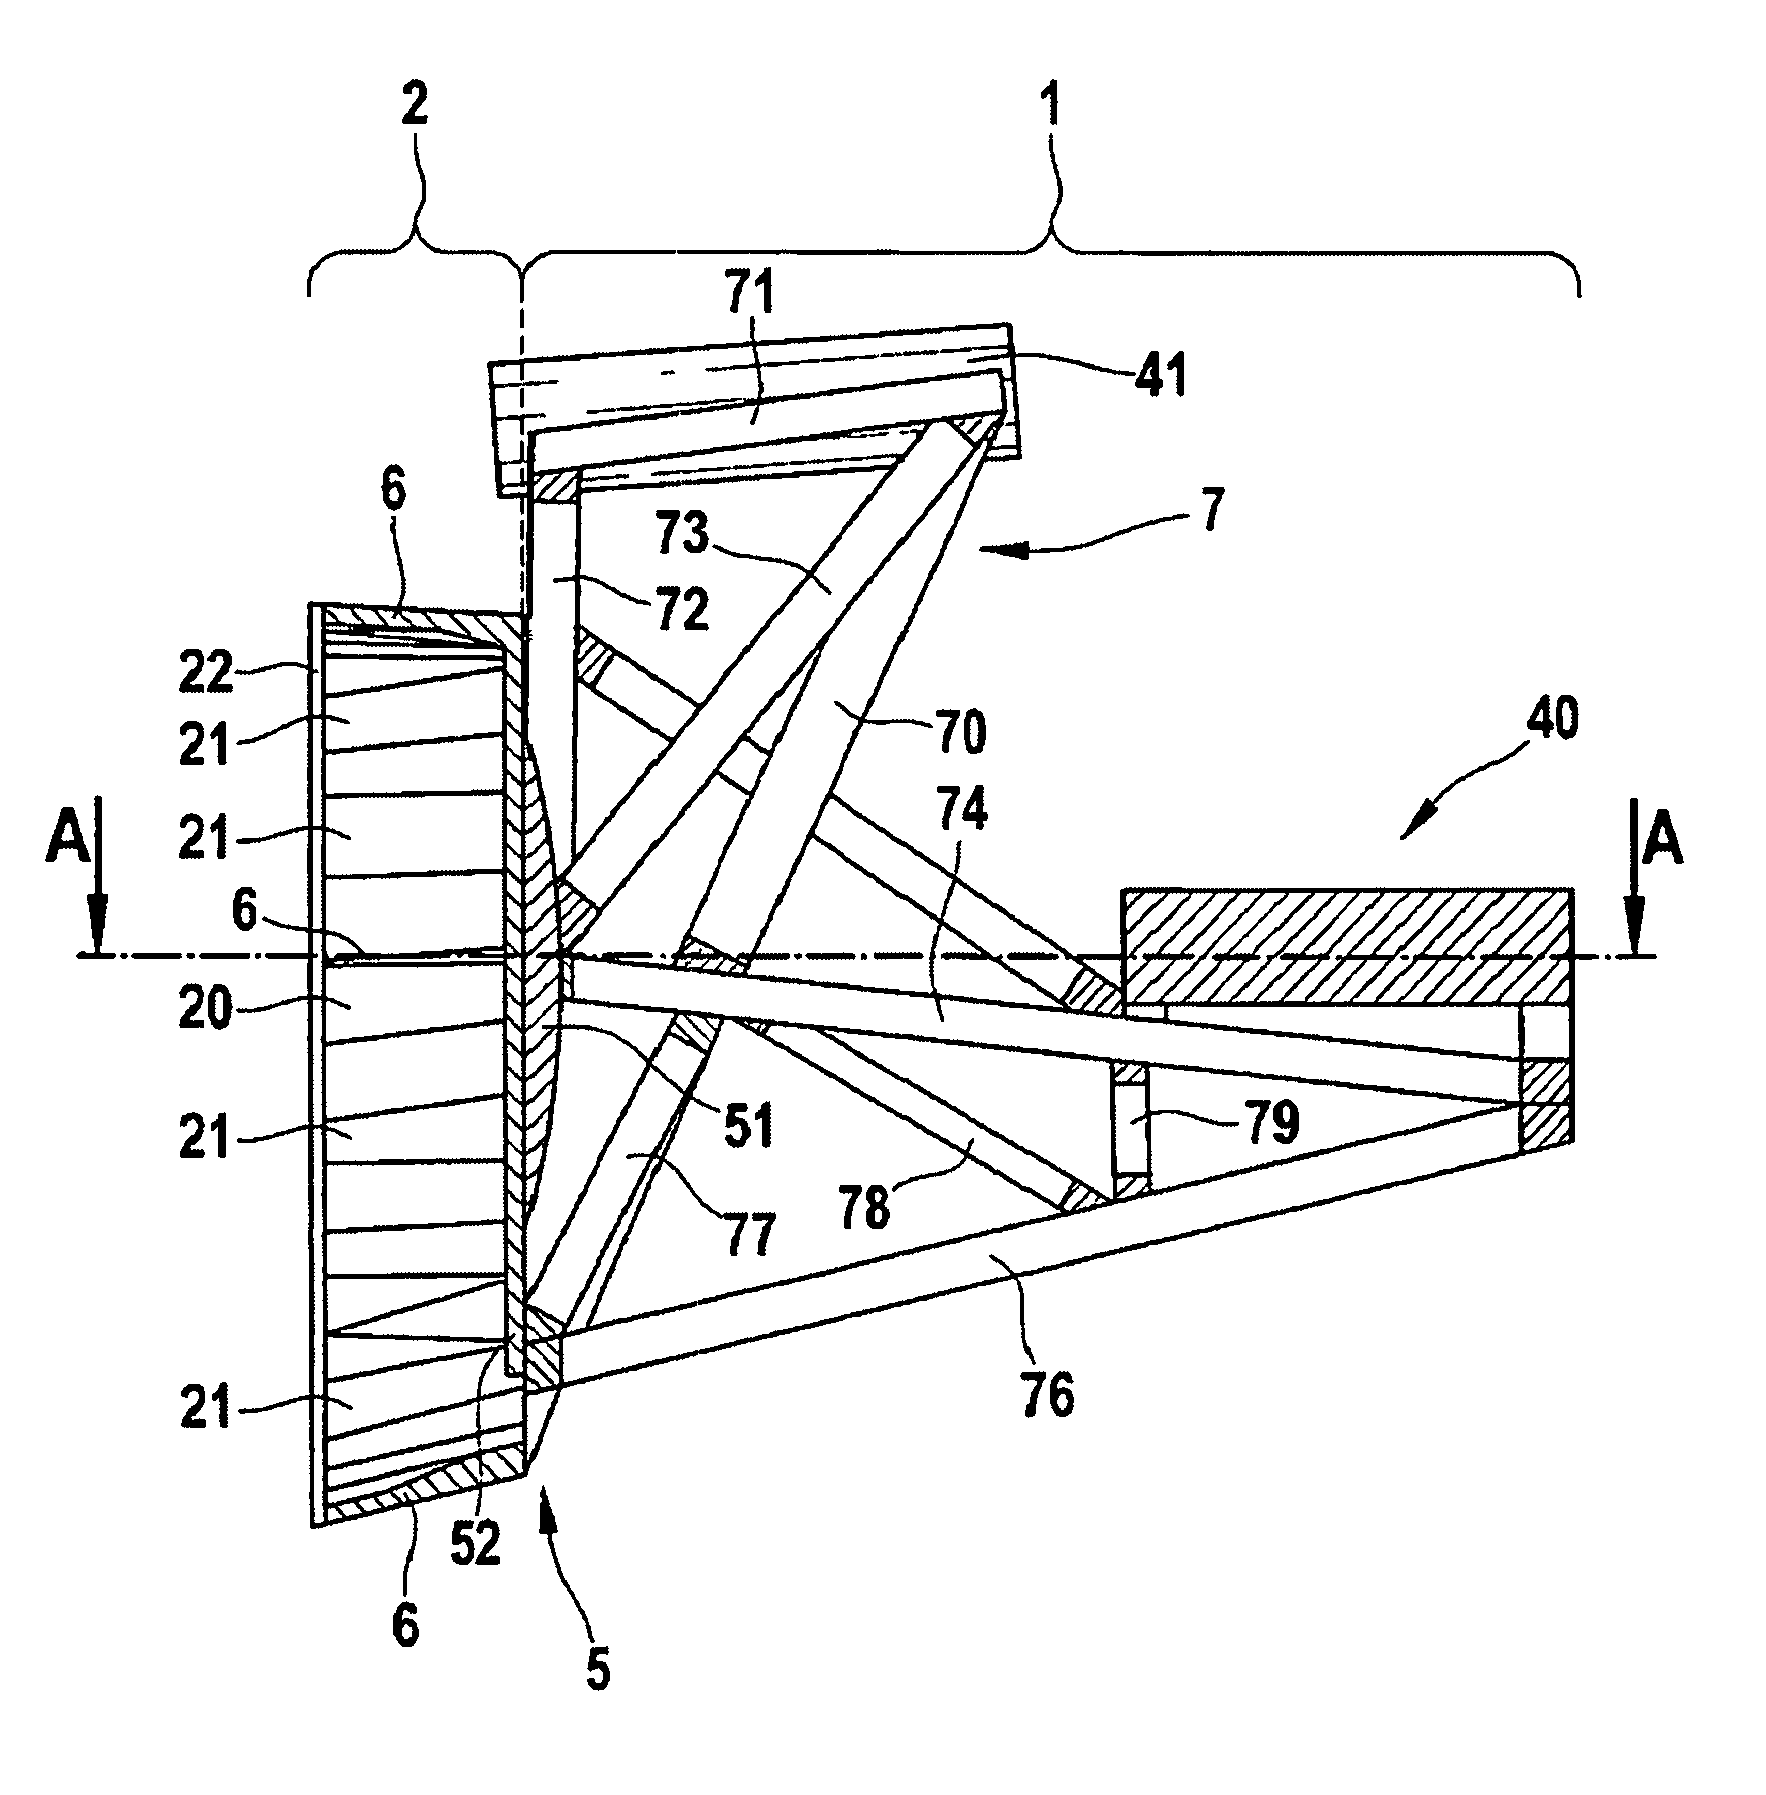 Tail structure for an aircraft or spacecraft